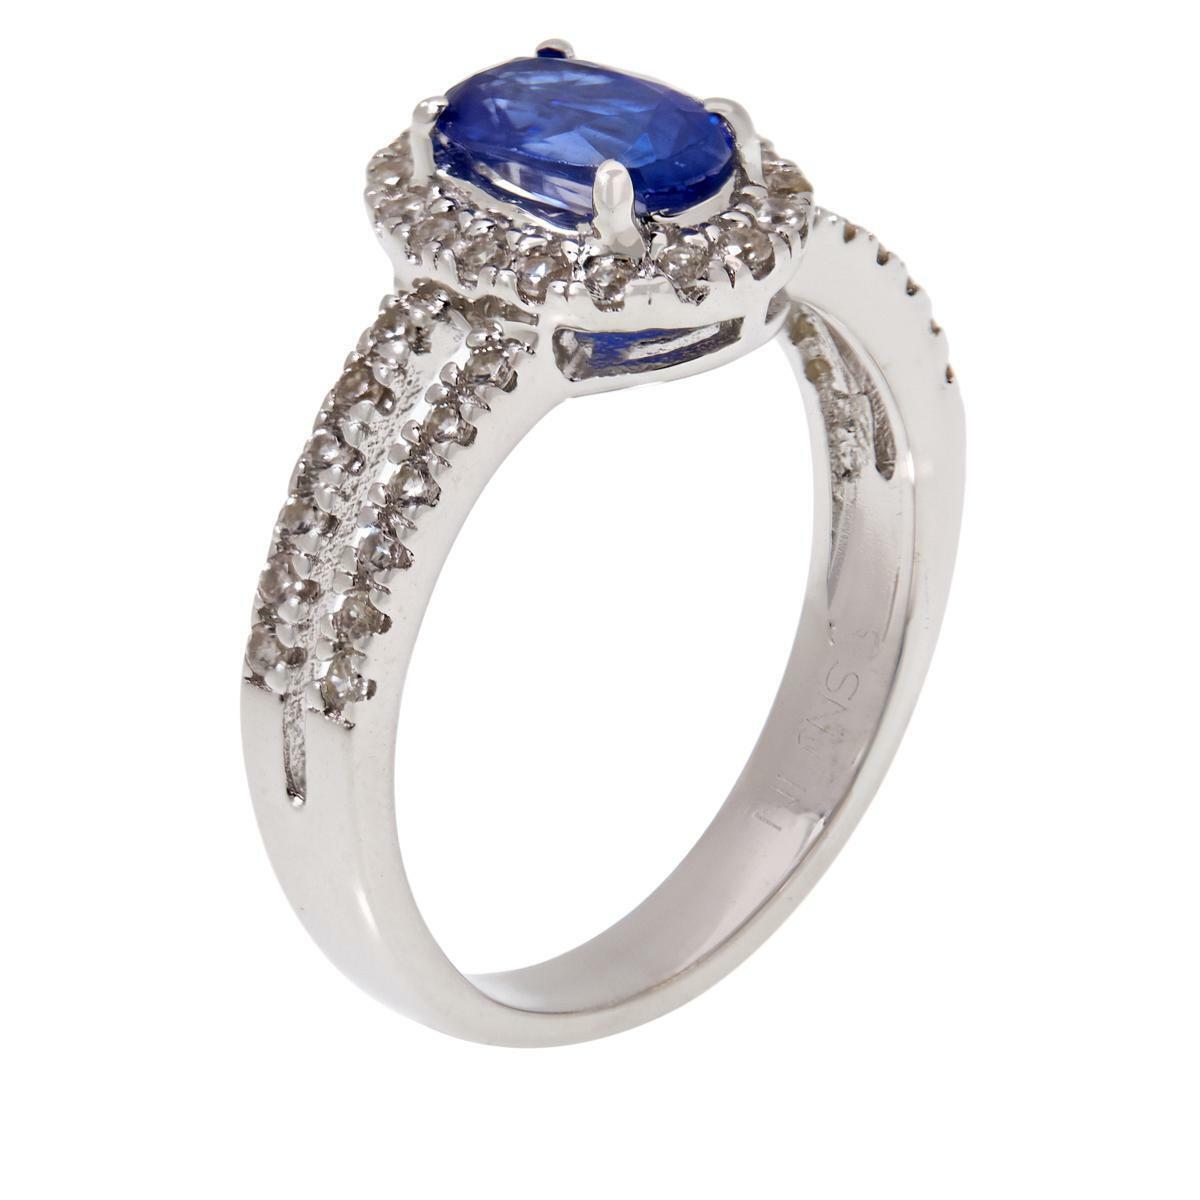 Colleen Lopez Sterling Silver Kyanite and White Zircon Halo Ring, Size 8